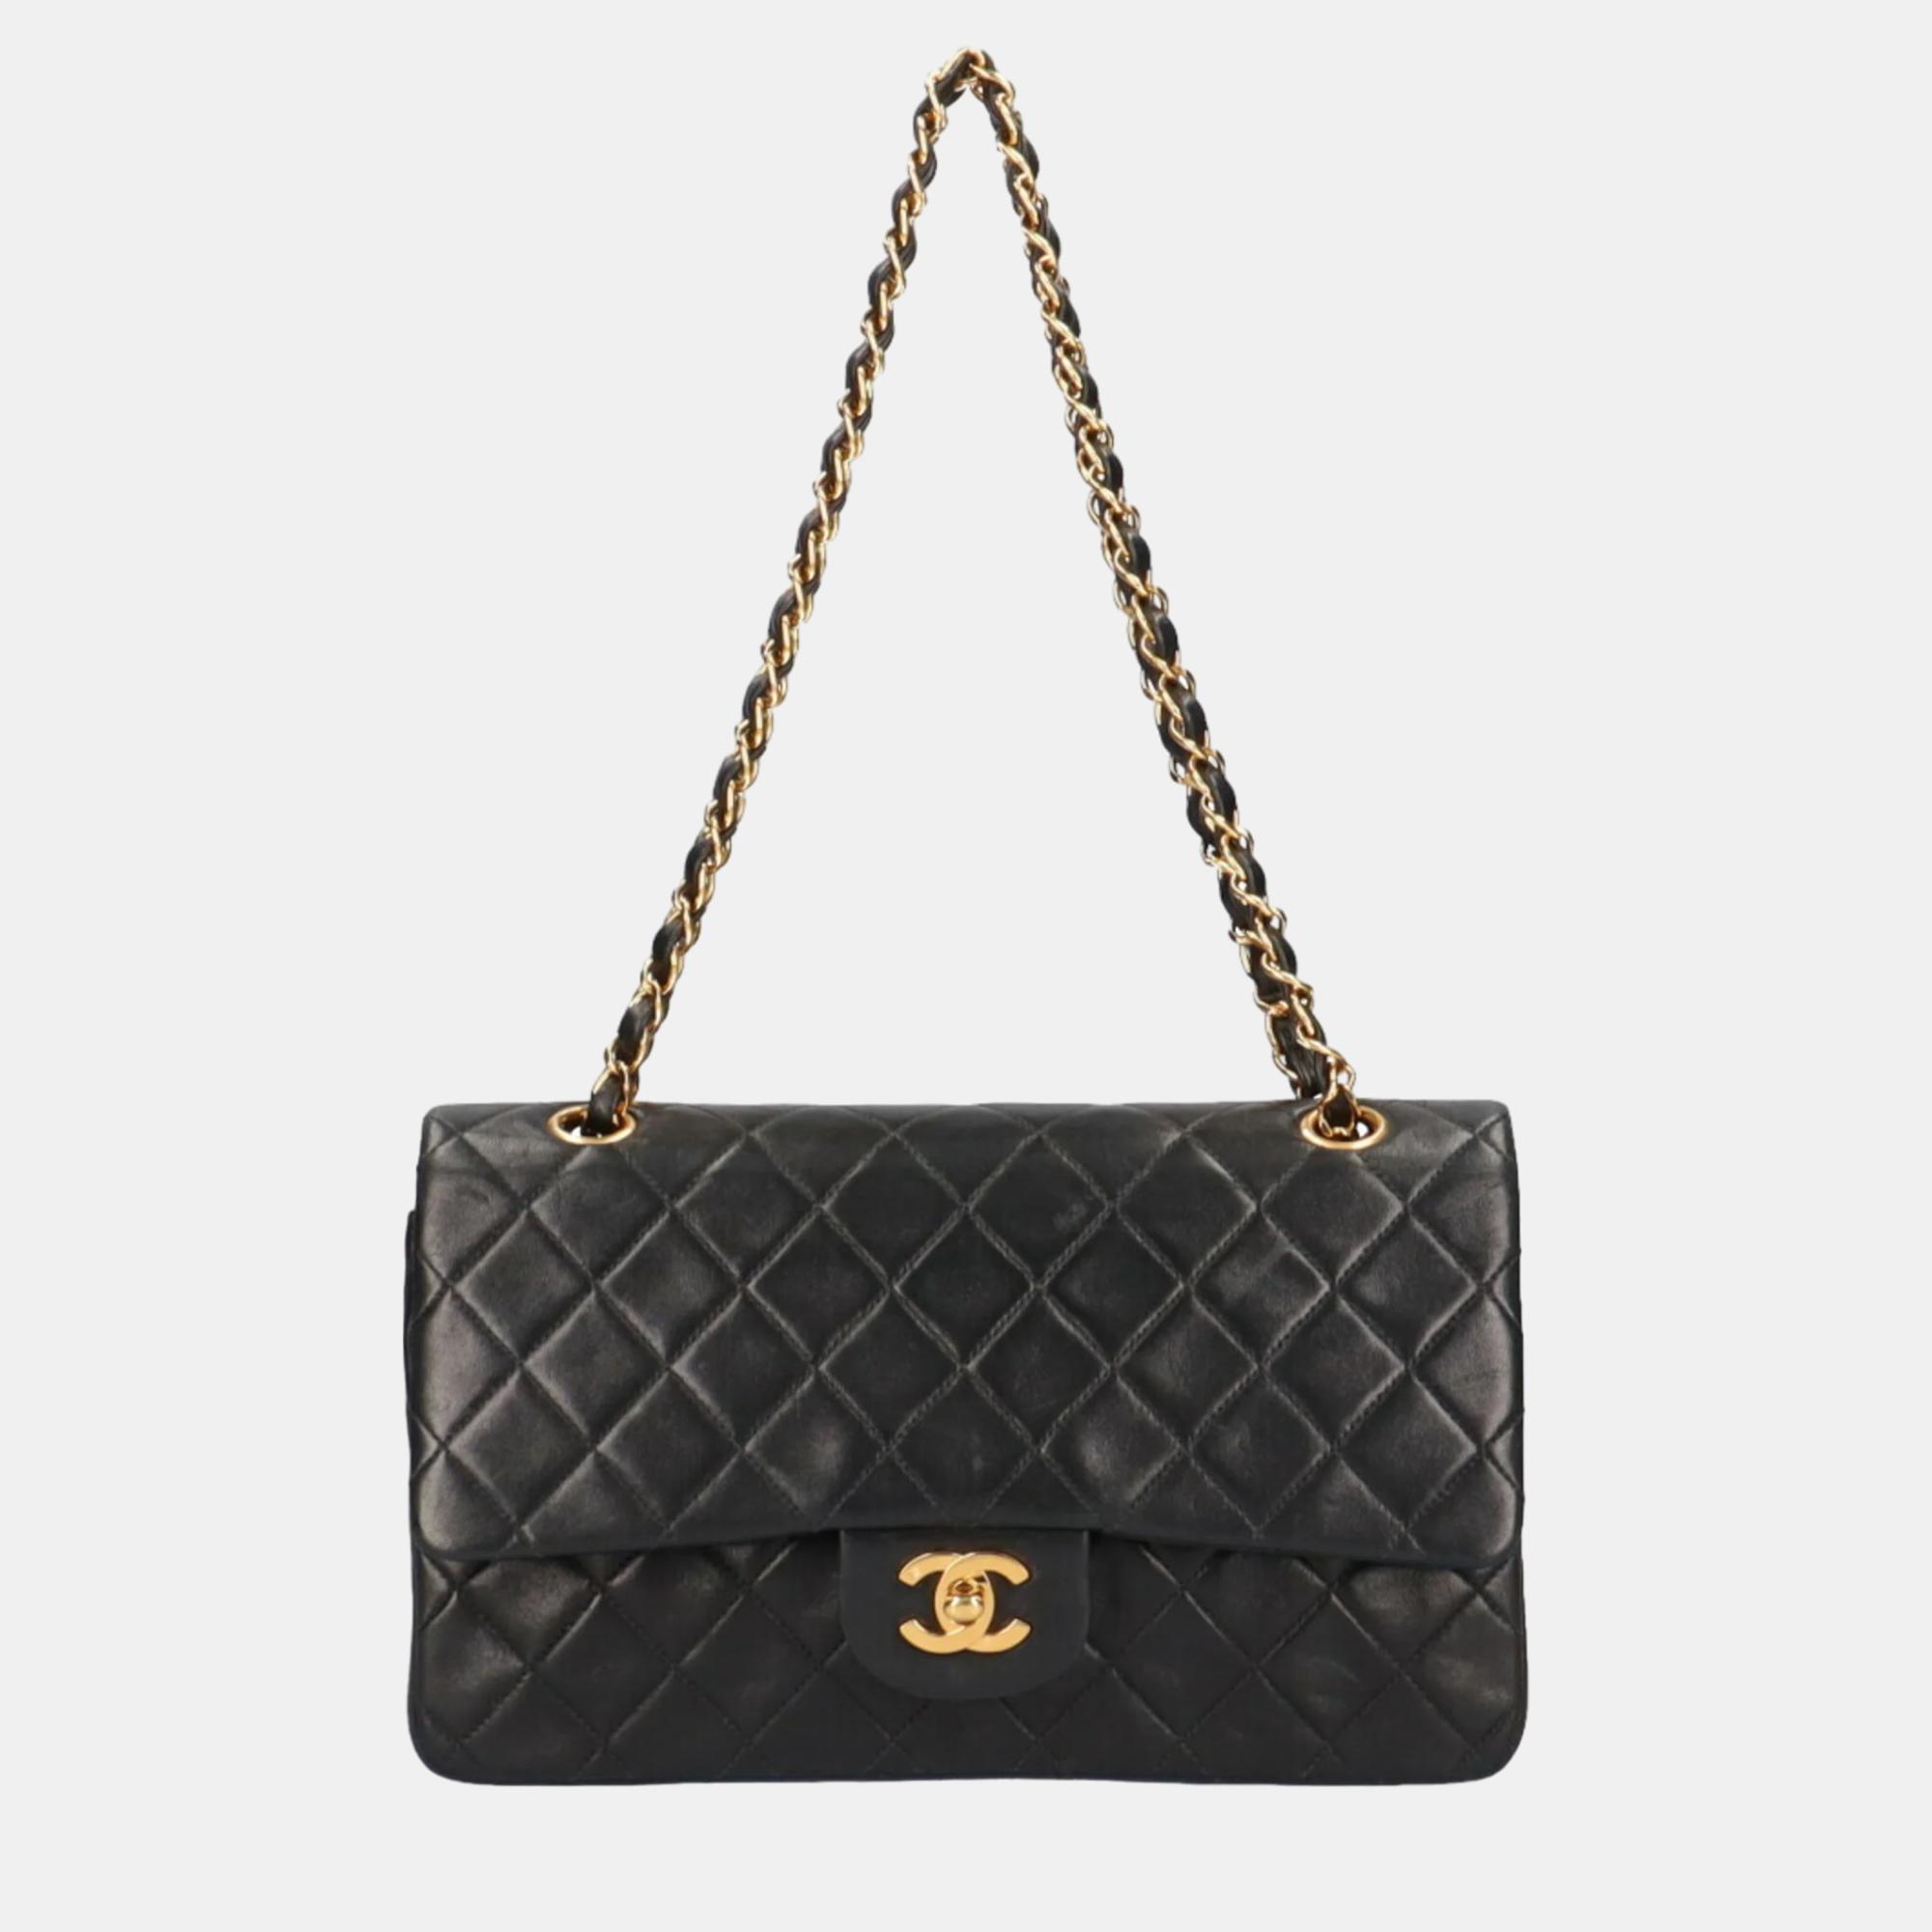 Chanel  lambskin leather large classic double flap shoulder bags